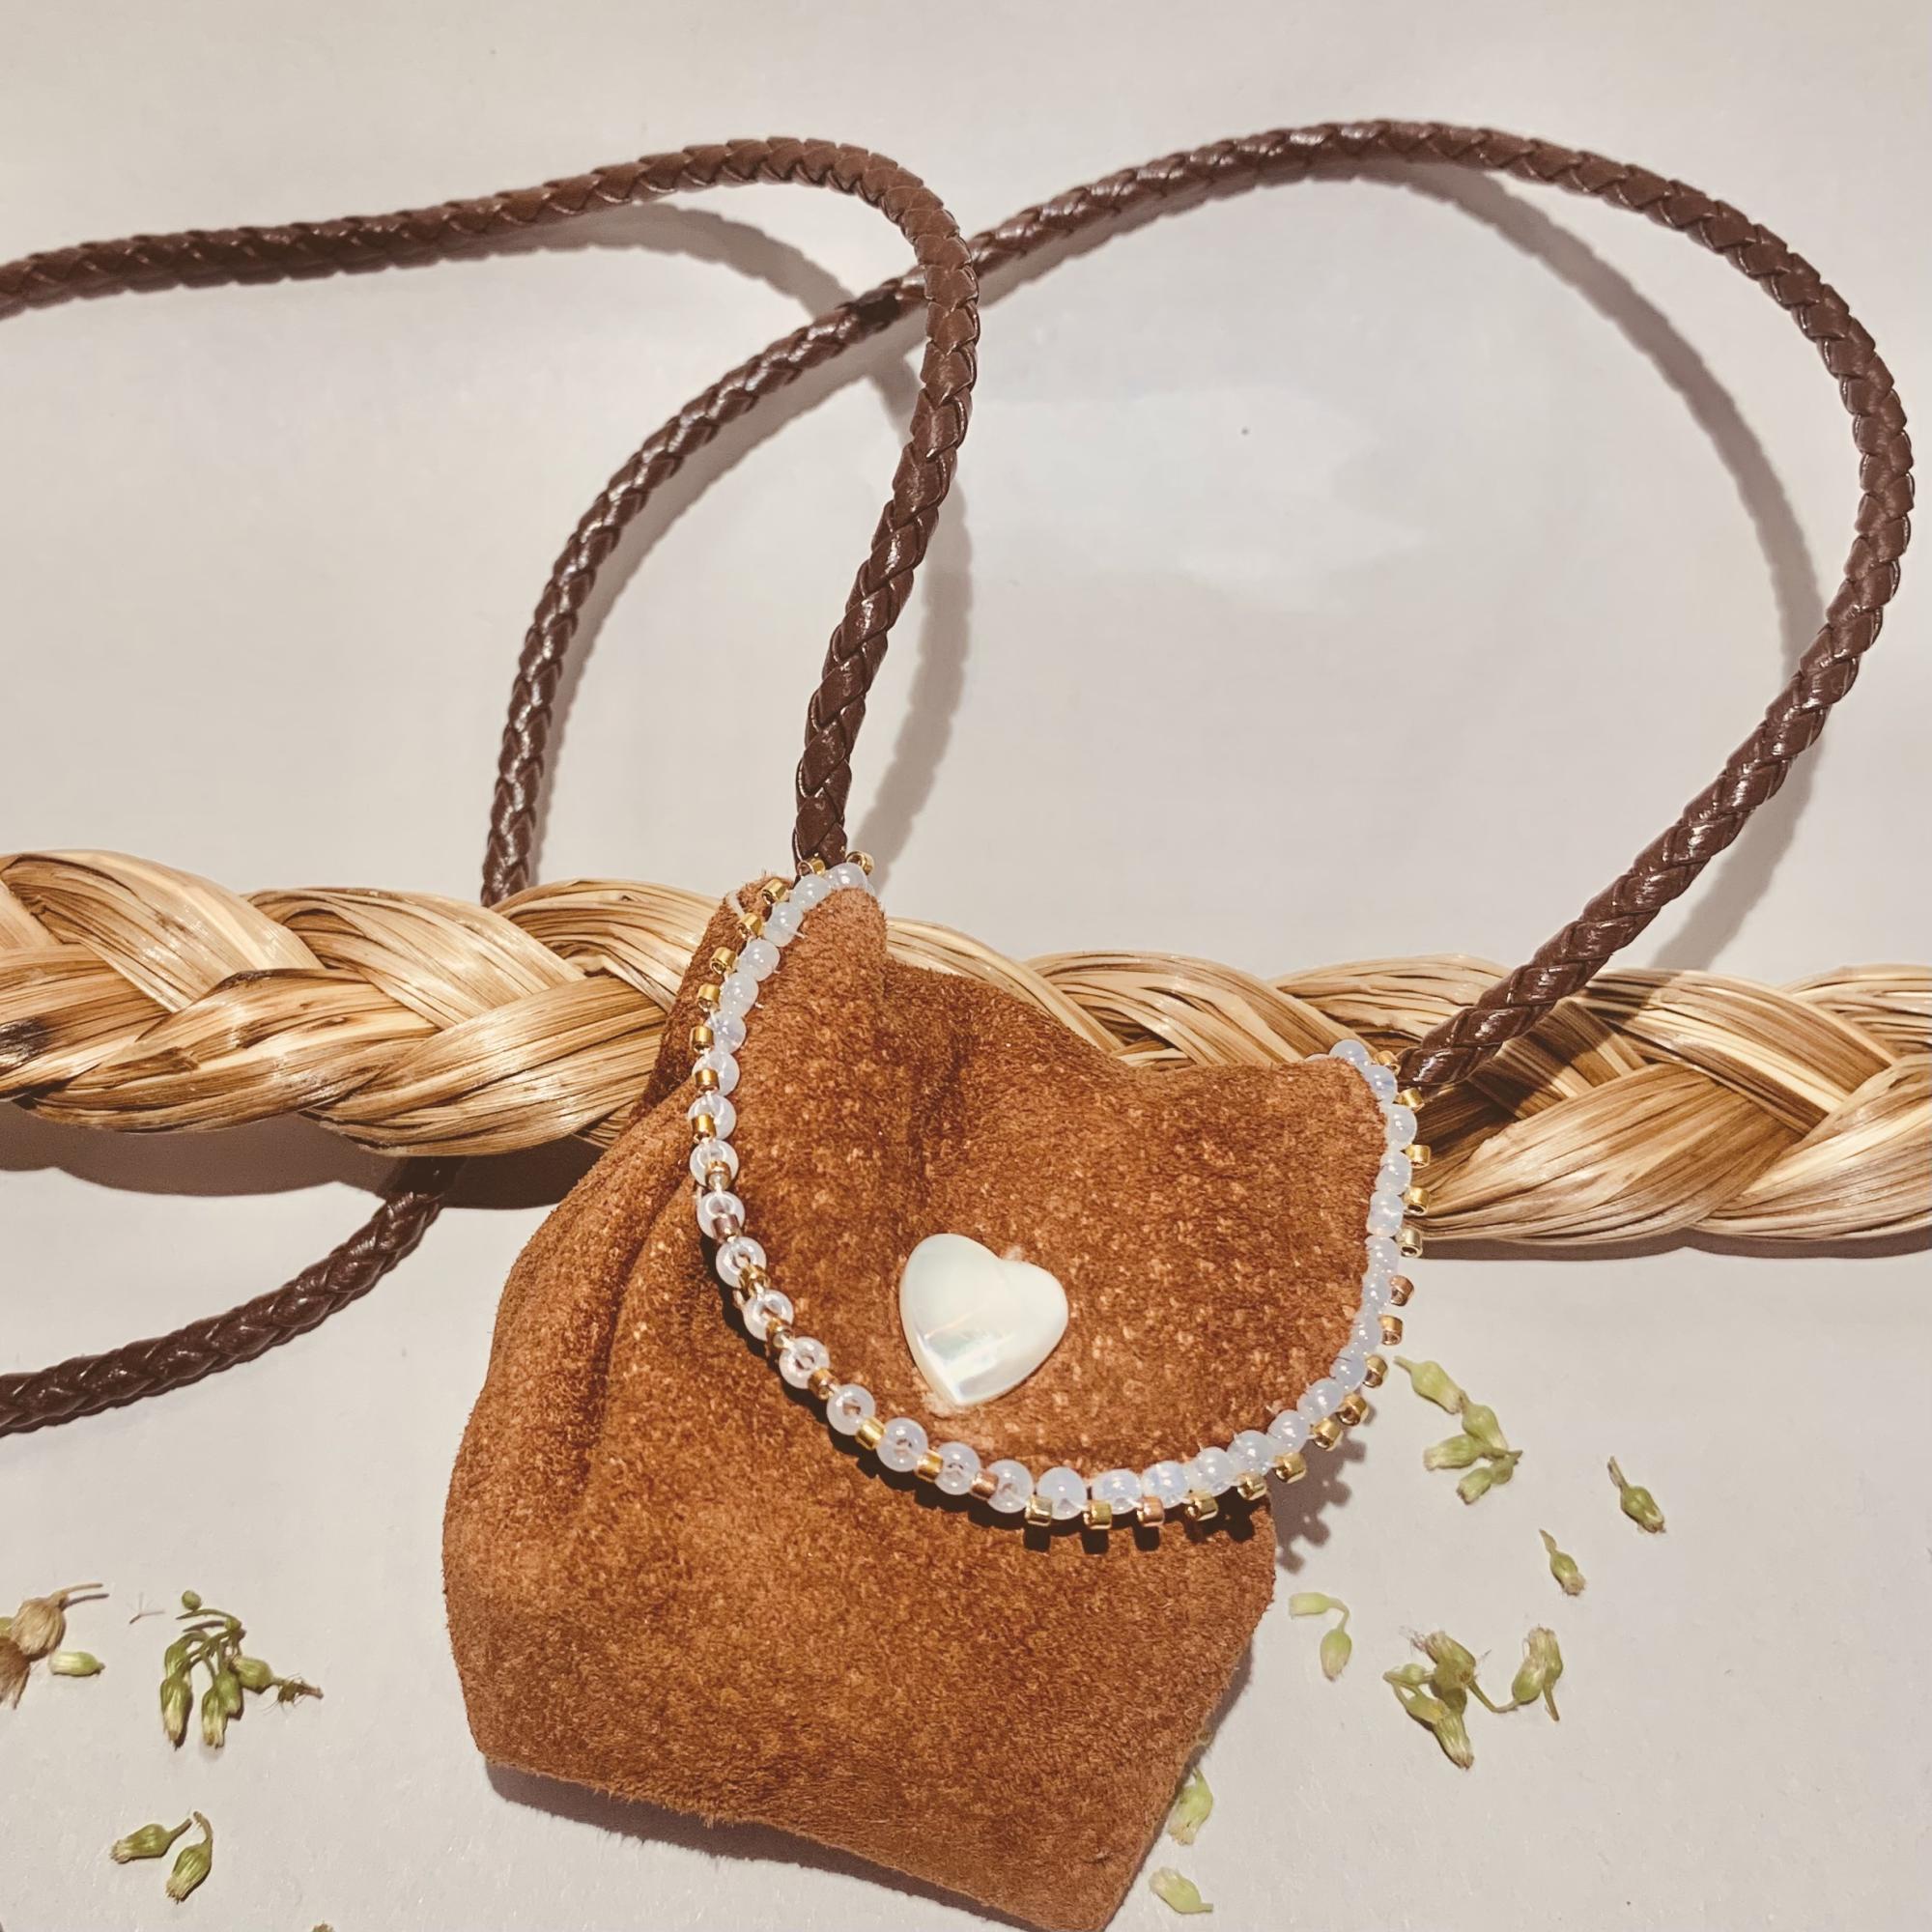 [ID: "Brown leather medicine bag beaded with white beads laying on top of braided sweetgrass and surrounded by green seeds."]